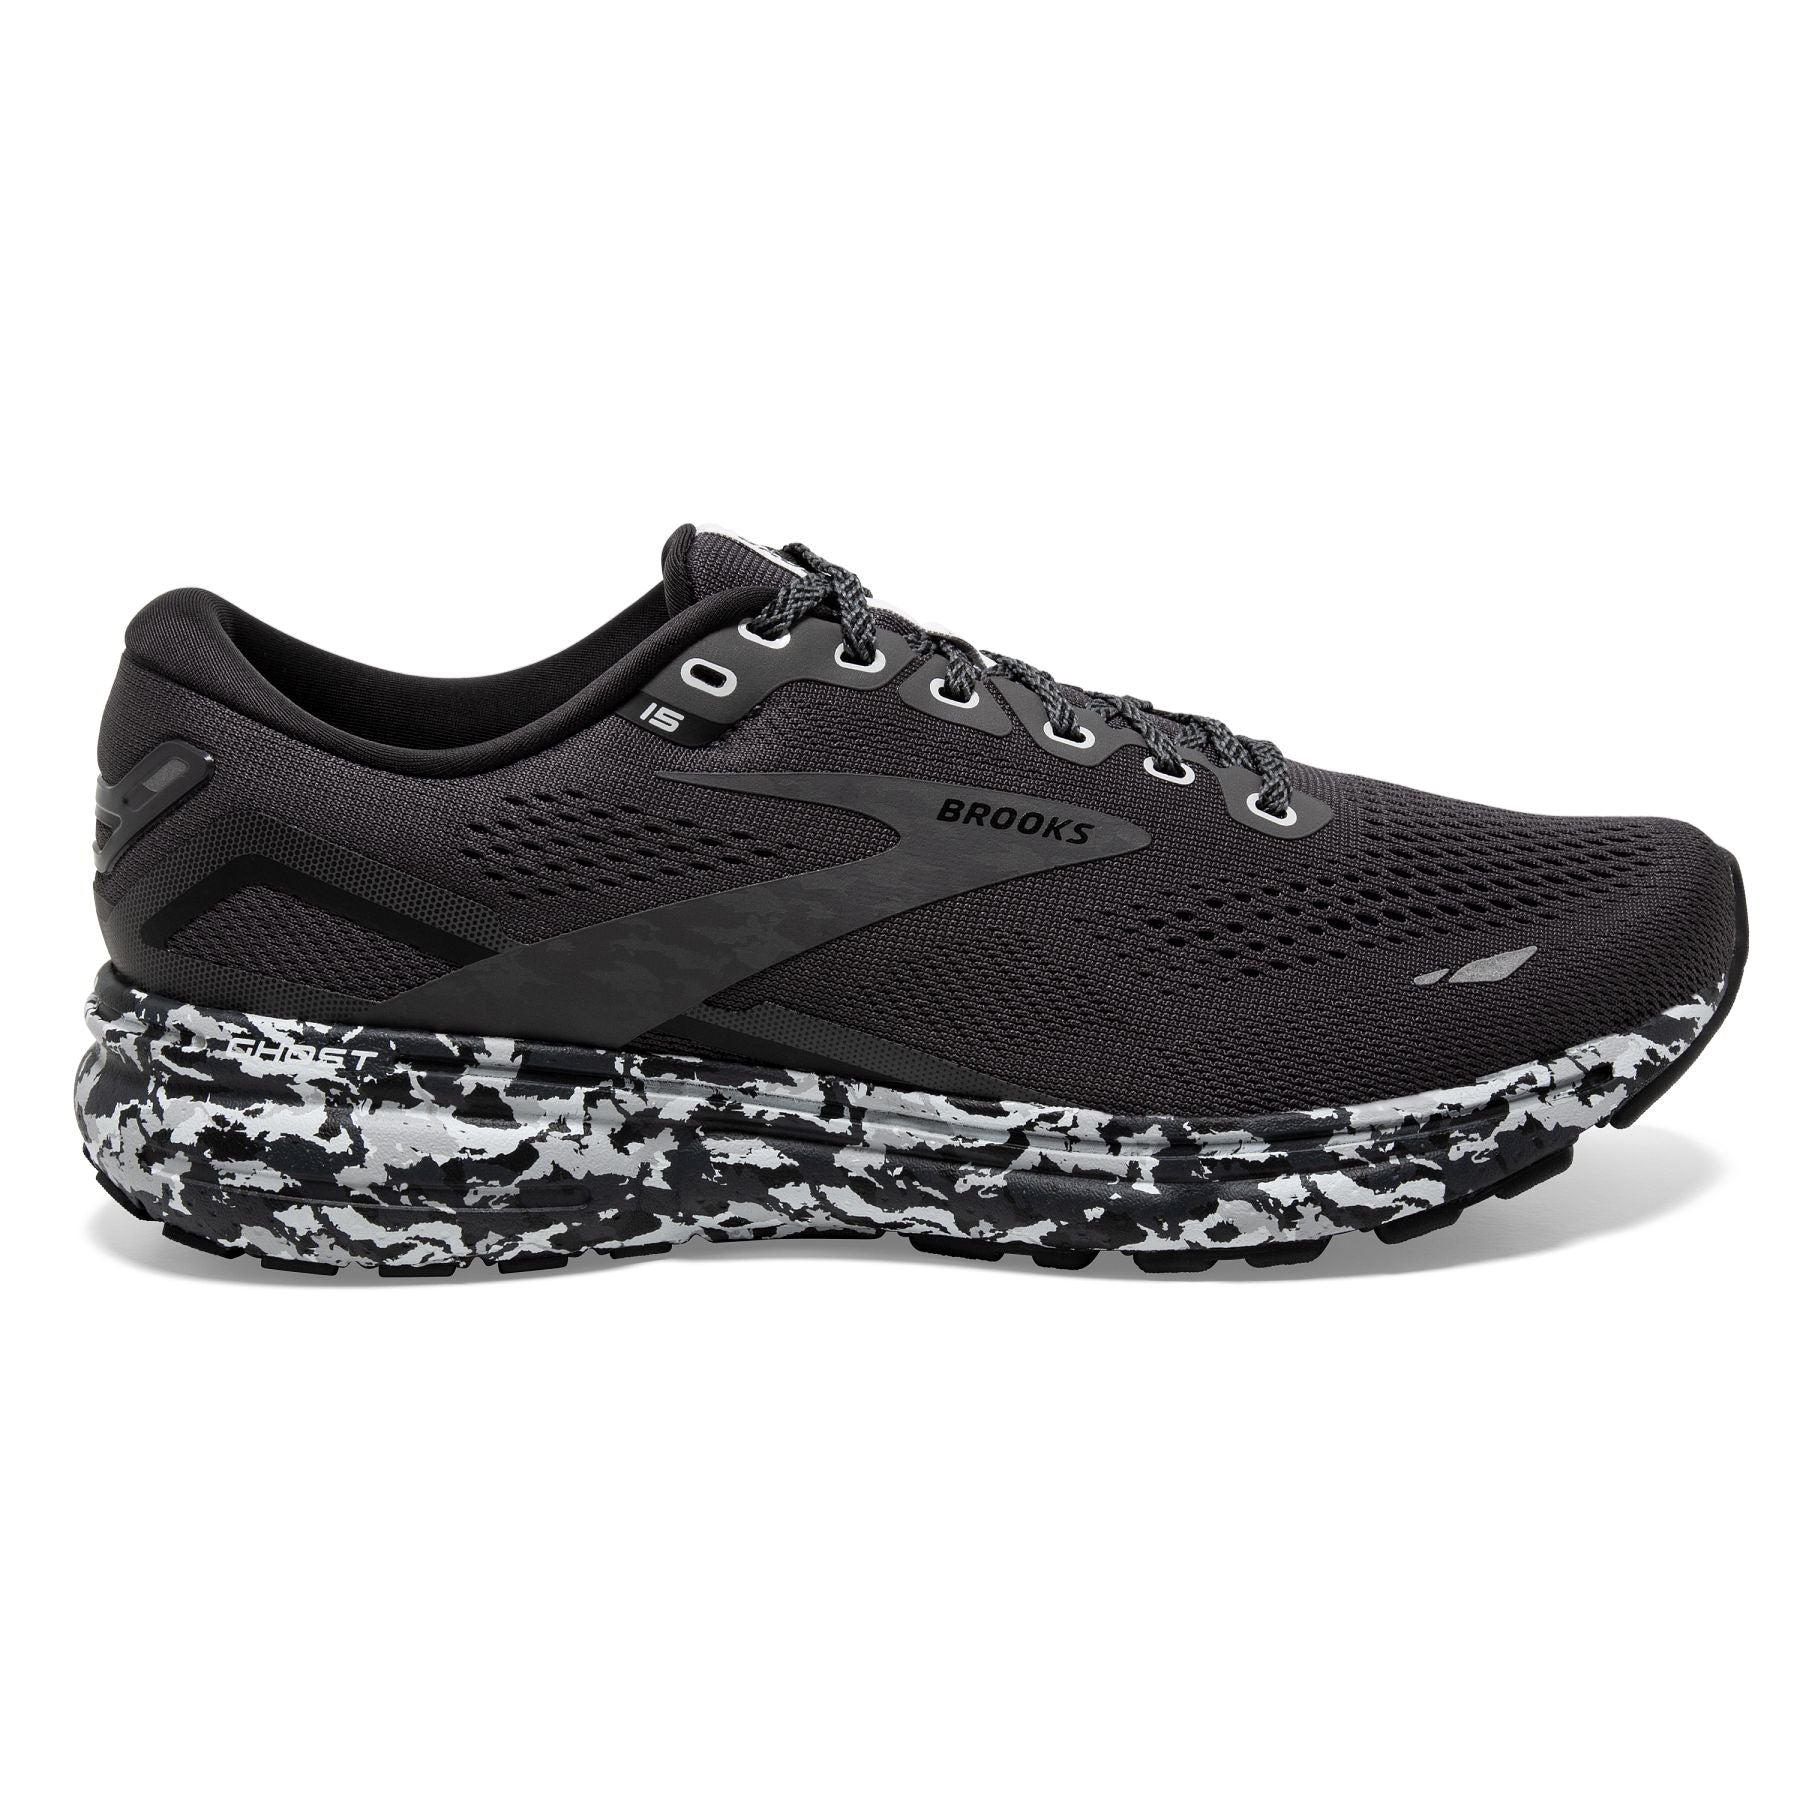 Lateral view of the Men's Ghost 15 by Brooks in the color Ebony/Black/Oyster